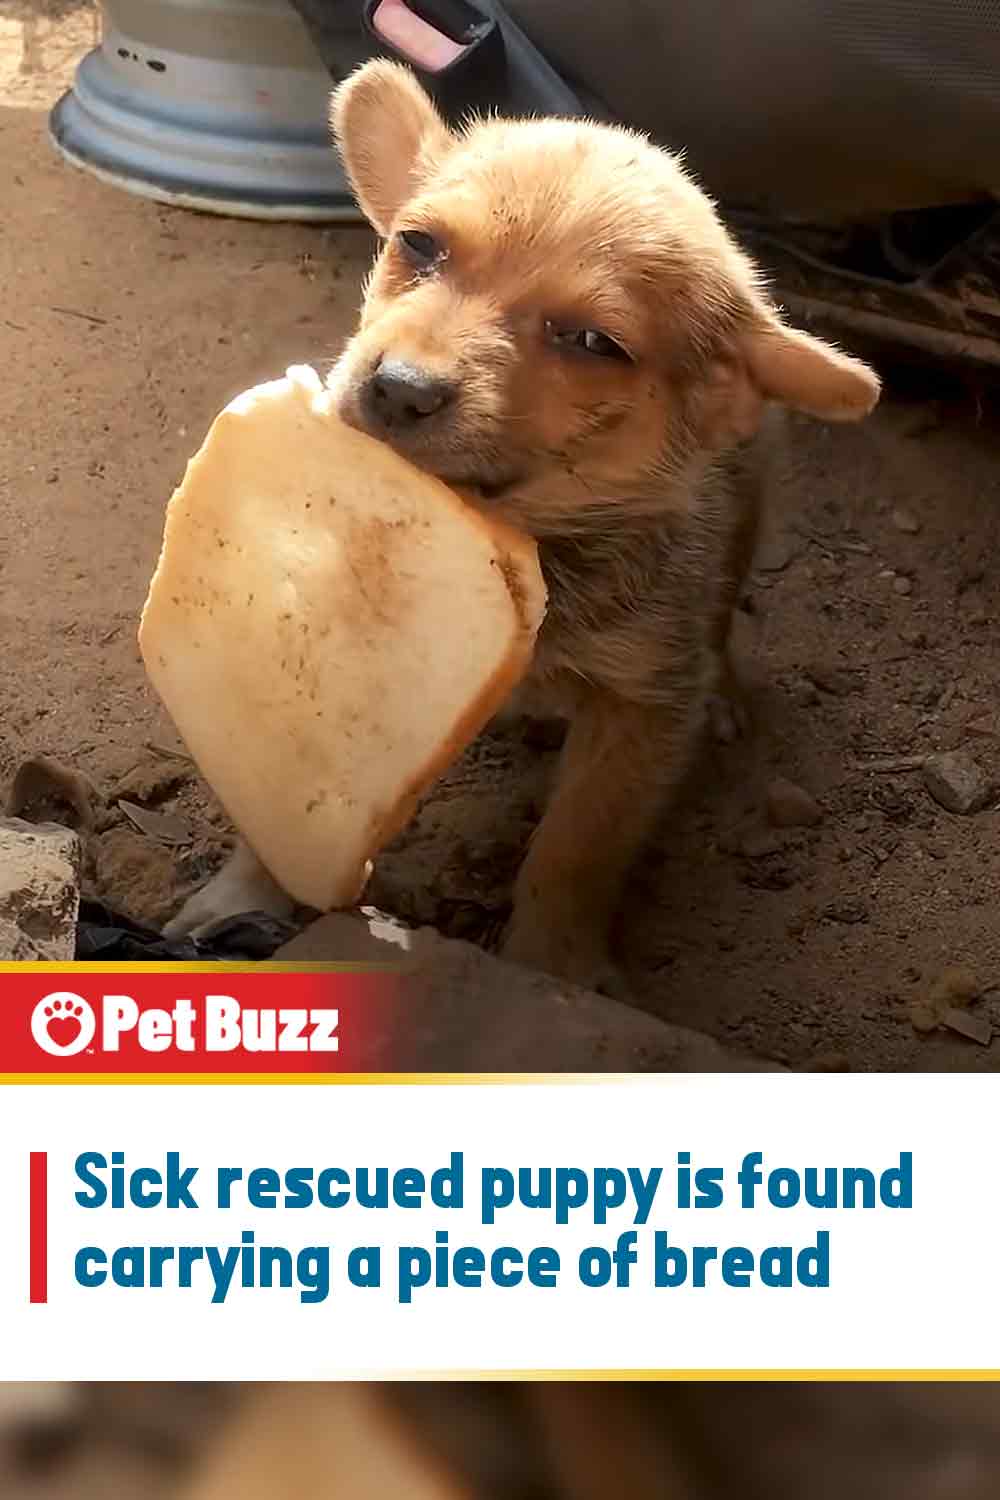 Sick rescued puppy is found carrying a piece of bread